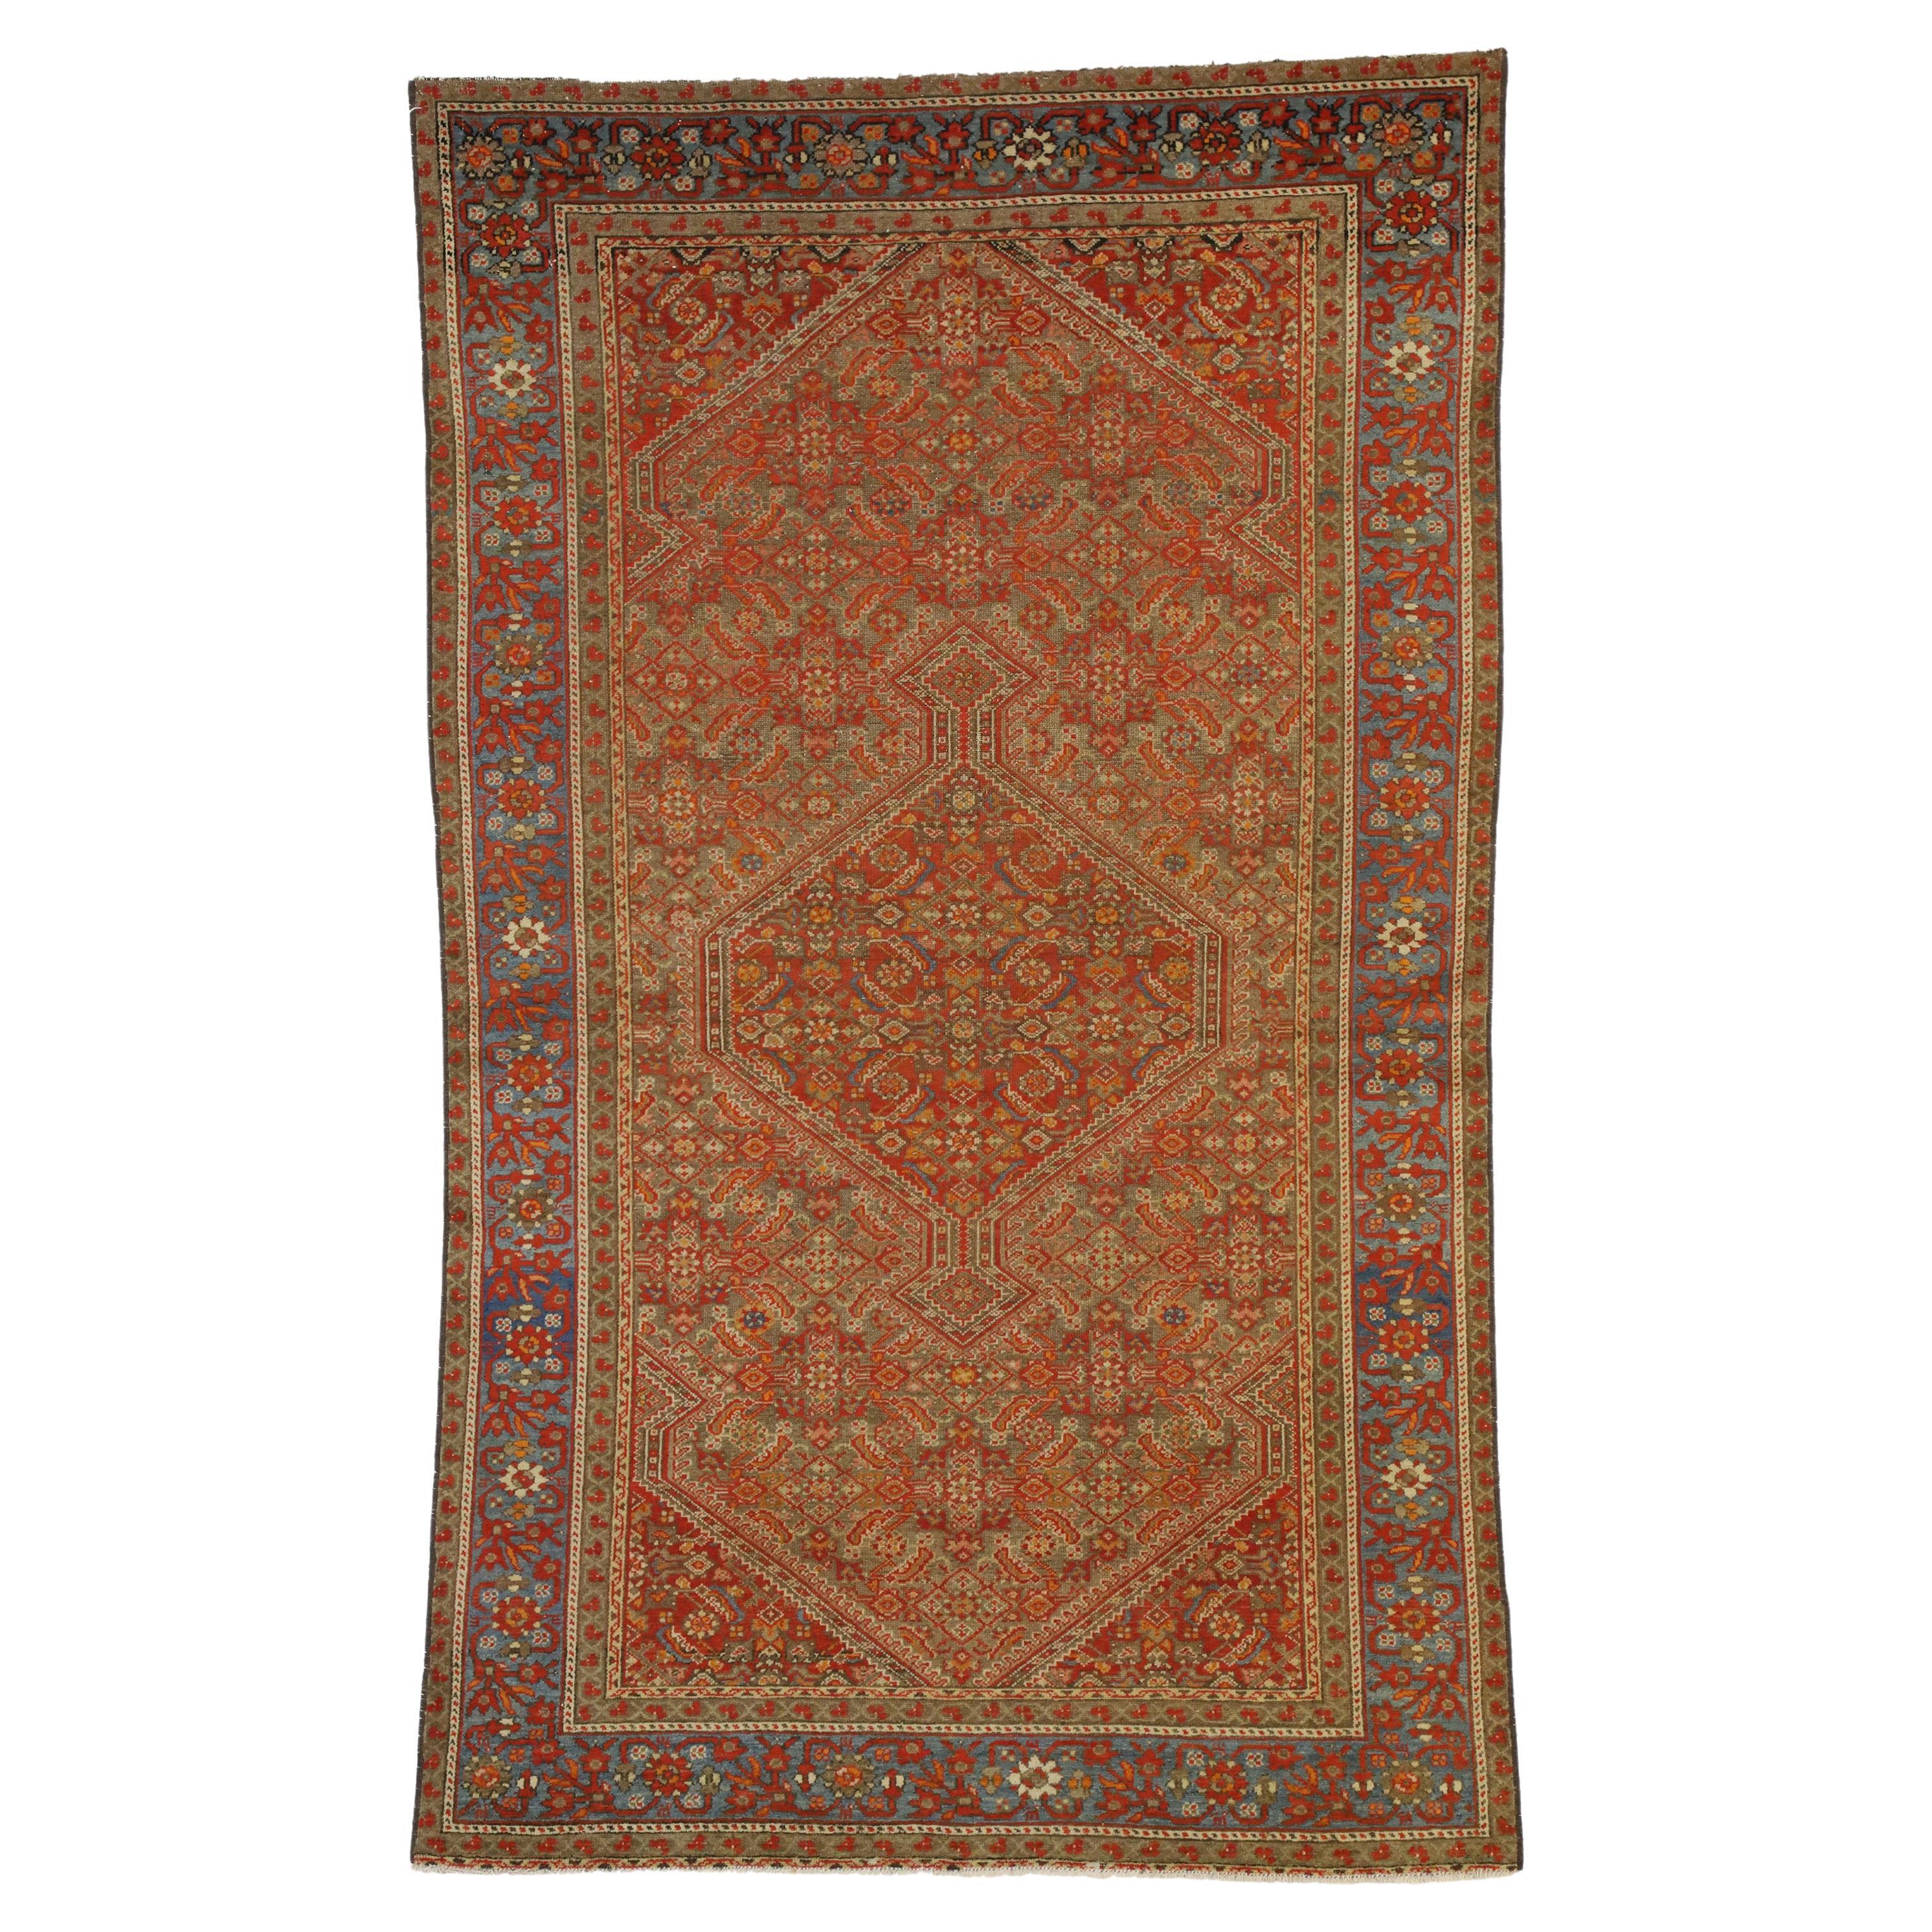 Tapis persan ancien Mishan Malayer avec style Arts & Crafts du nord-ouest